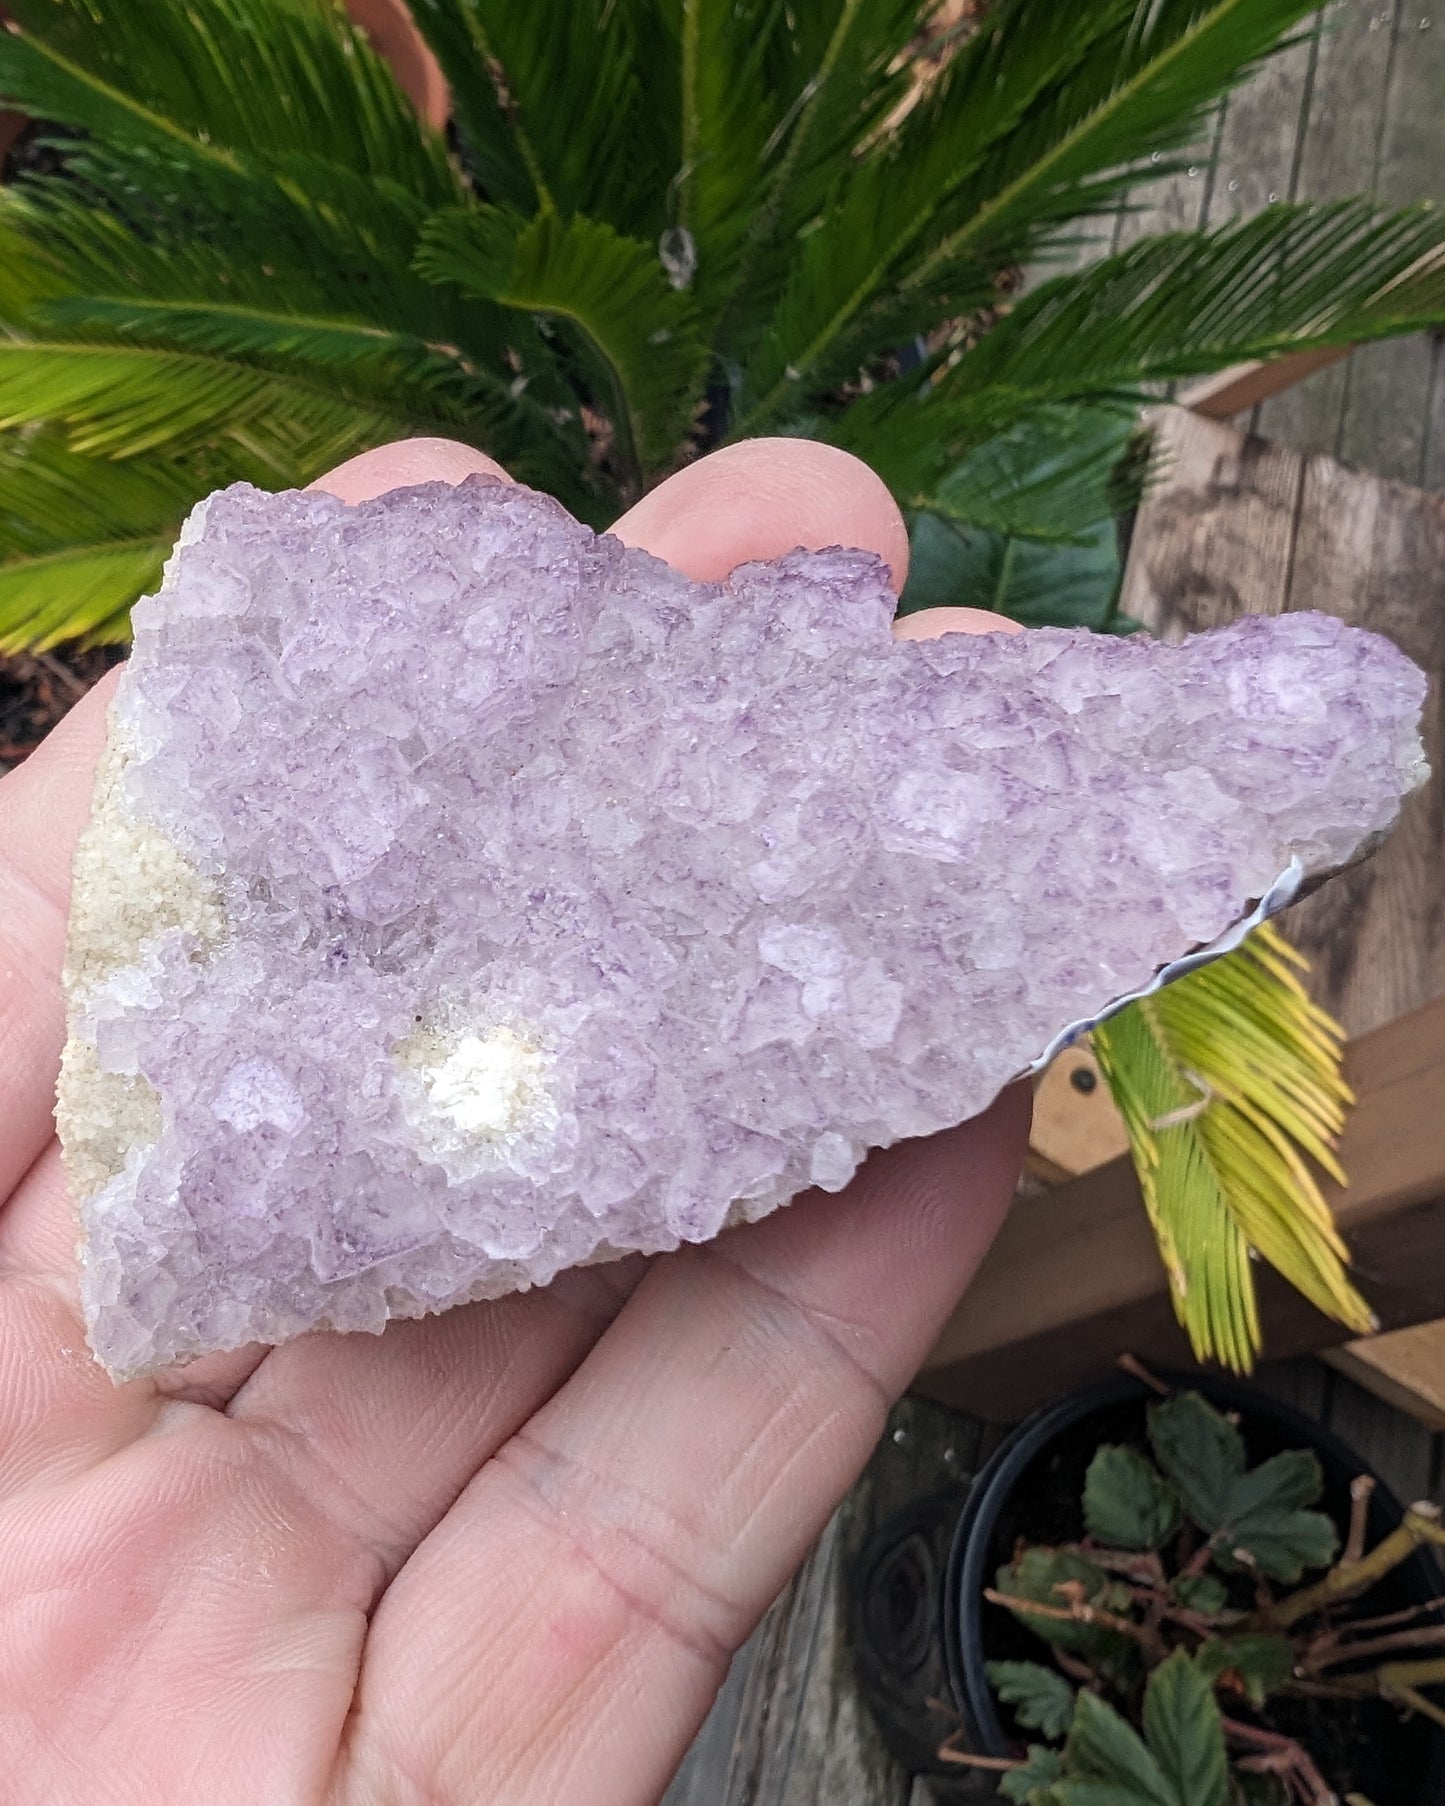 Purple Fluorite cluster from China 113g